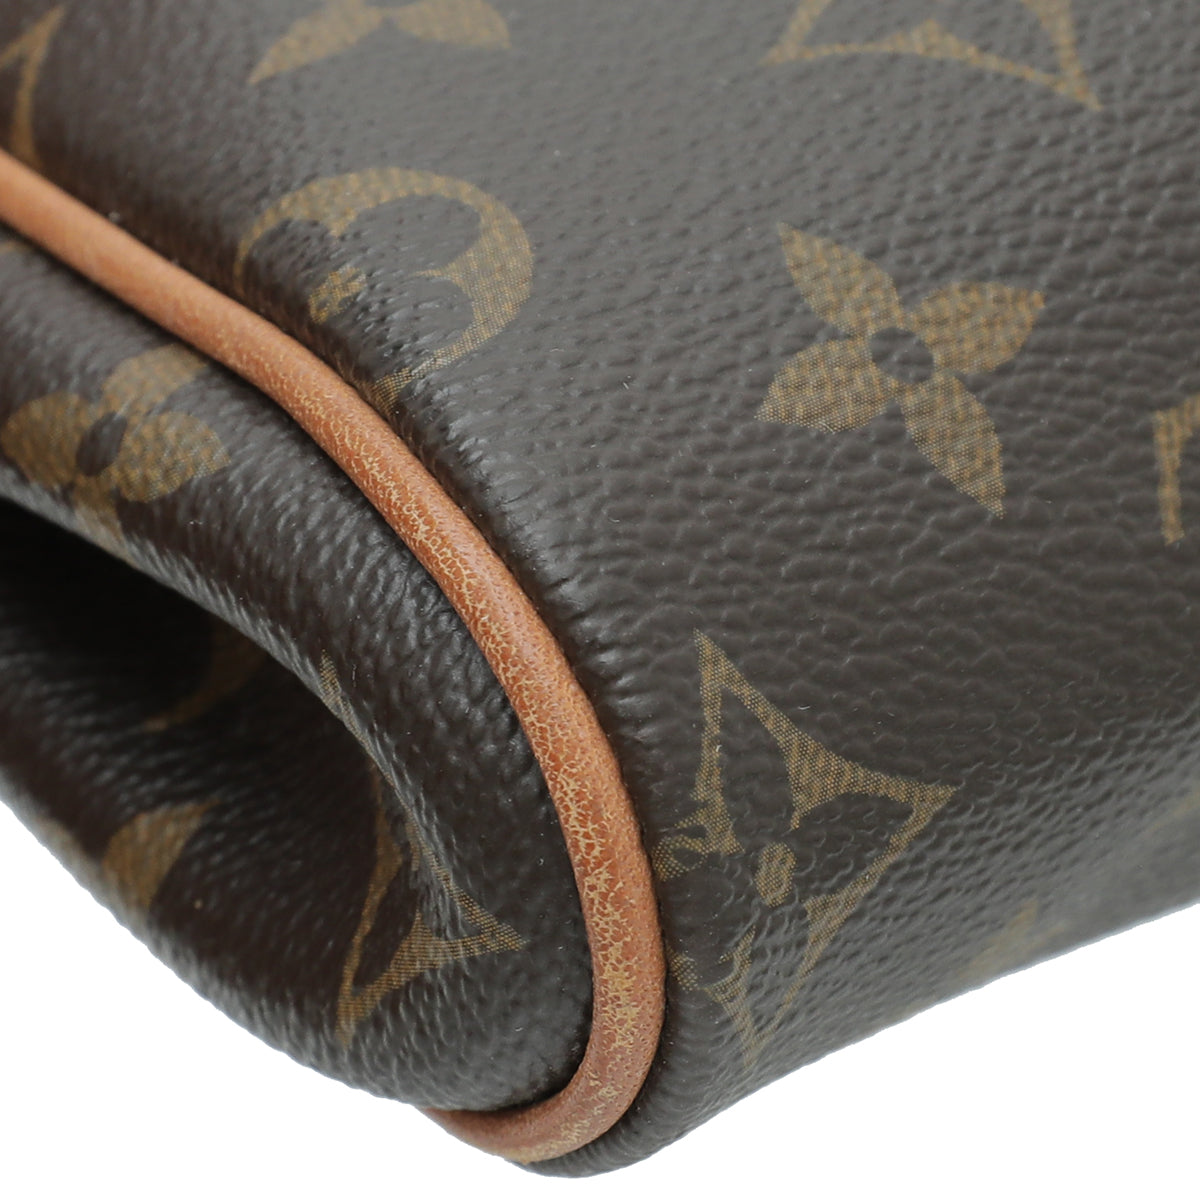 Eva leather clutch bag Louis Vuitton Brown in Leather - 35607429